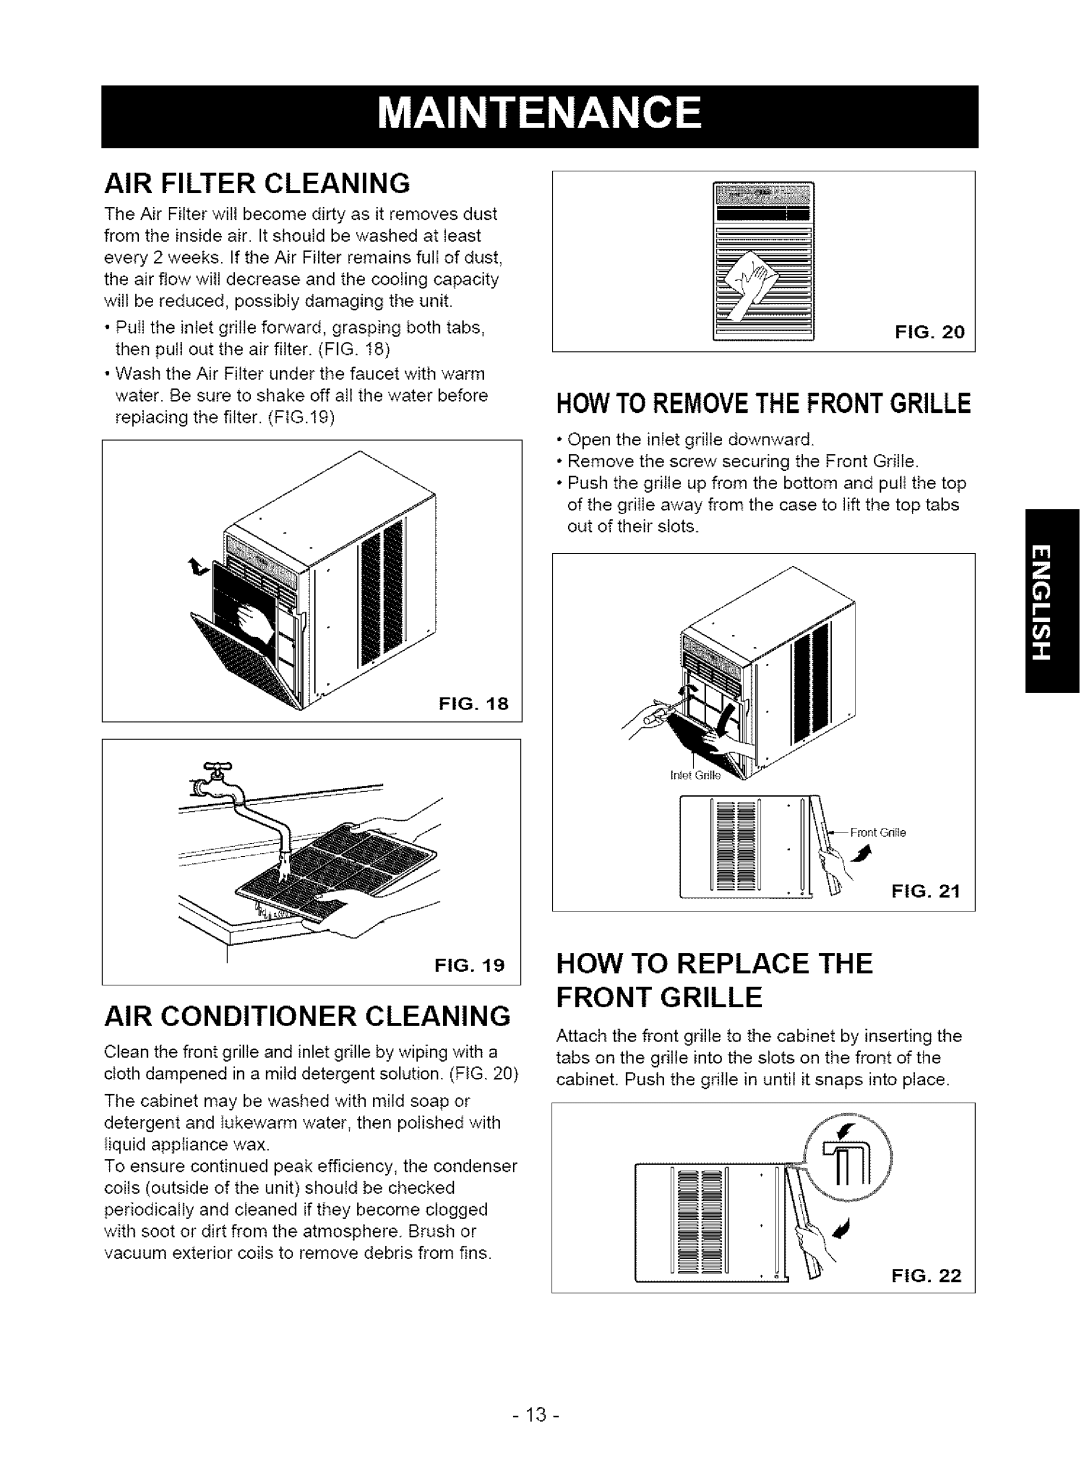 Kenmore 580.75123, 580. 75063 Air Filter Cleaning, Air Conditioner Cleaning, Howto Removethe Frontgrille, Fig. Fig 